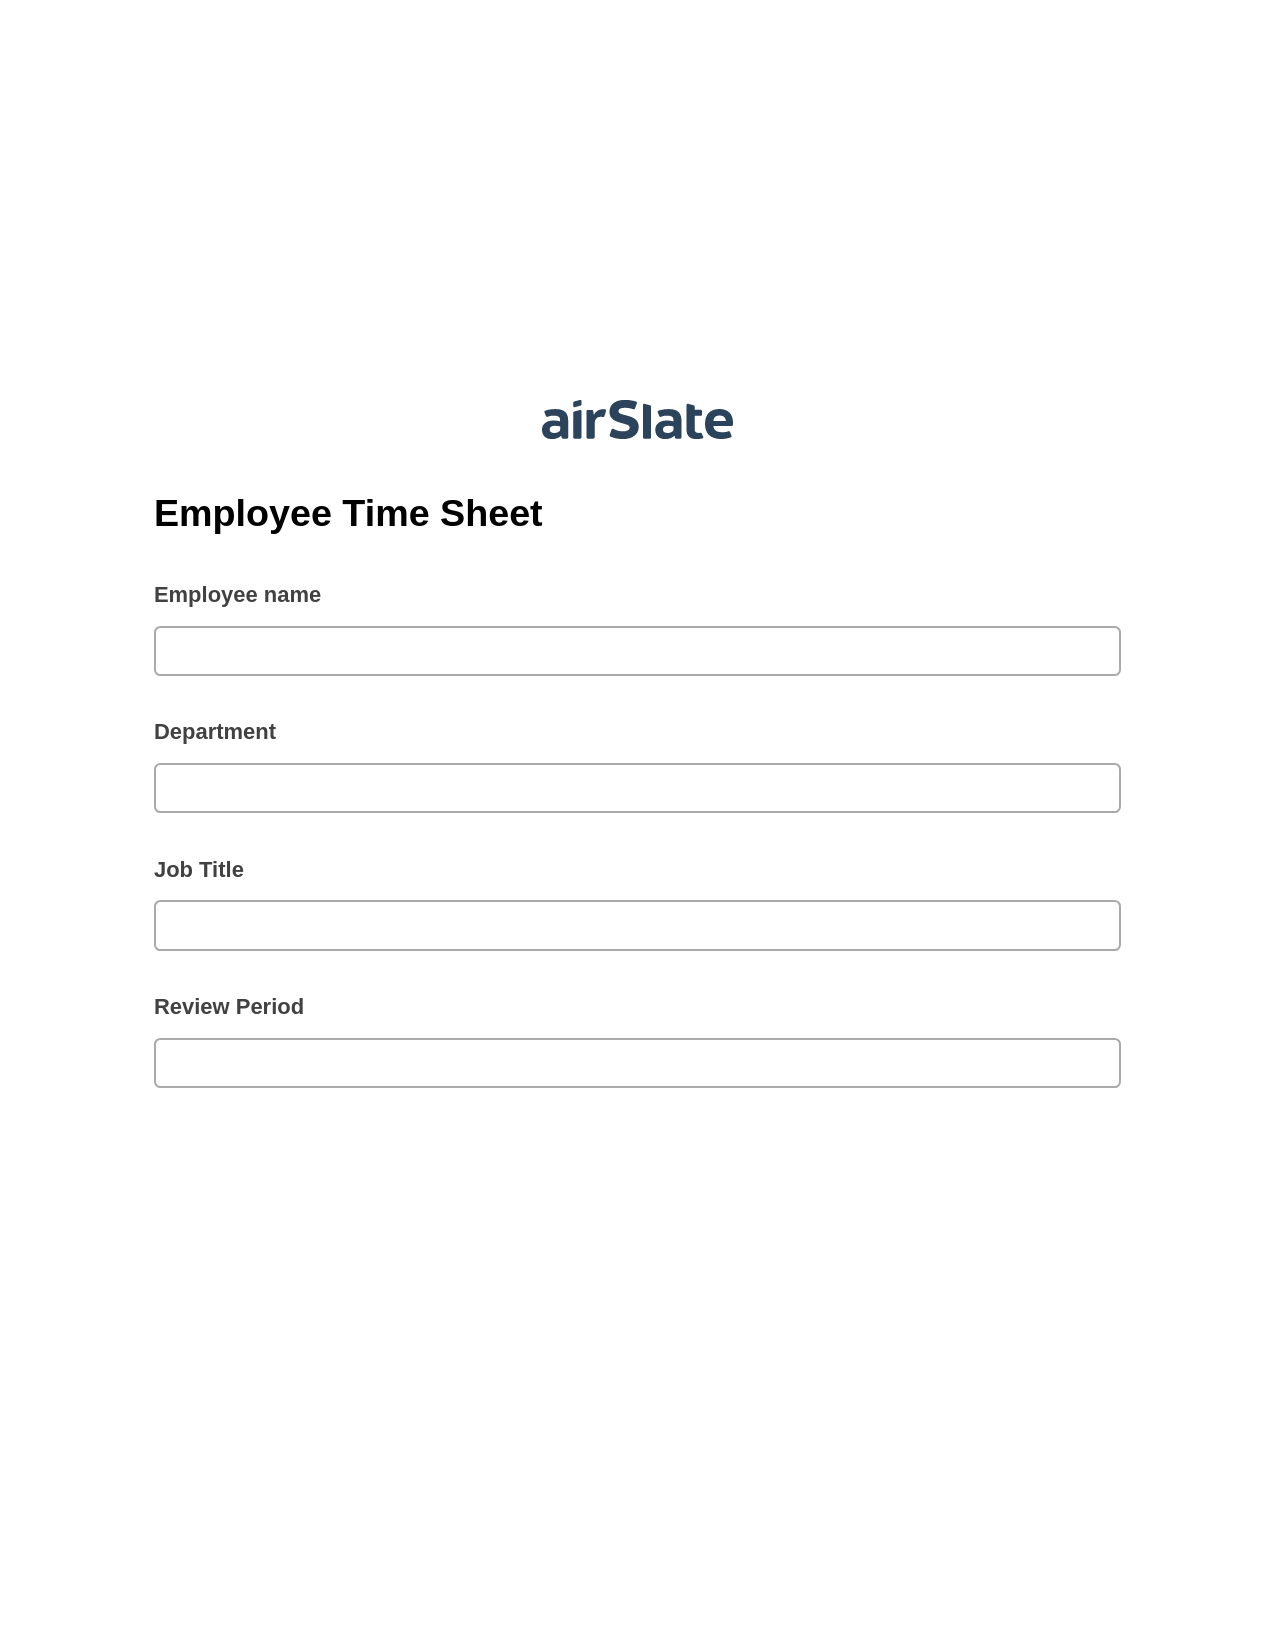 Employee Time Sheet Pre-fill Dropdowns from Excel Bot, Create slate addon, Export to Google Sheet Bot